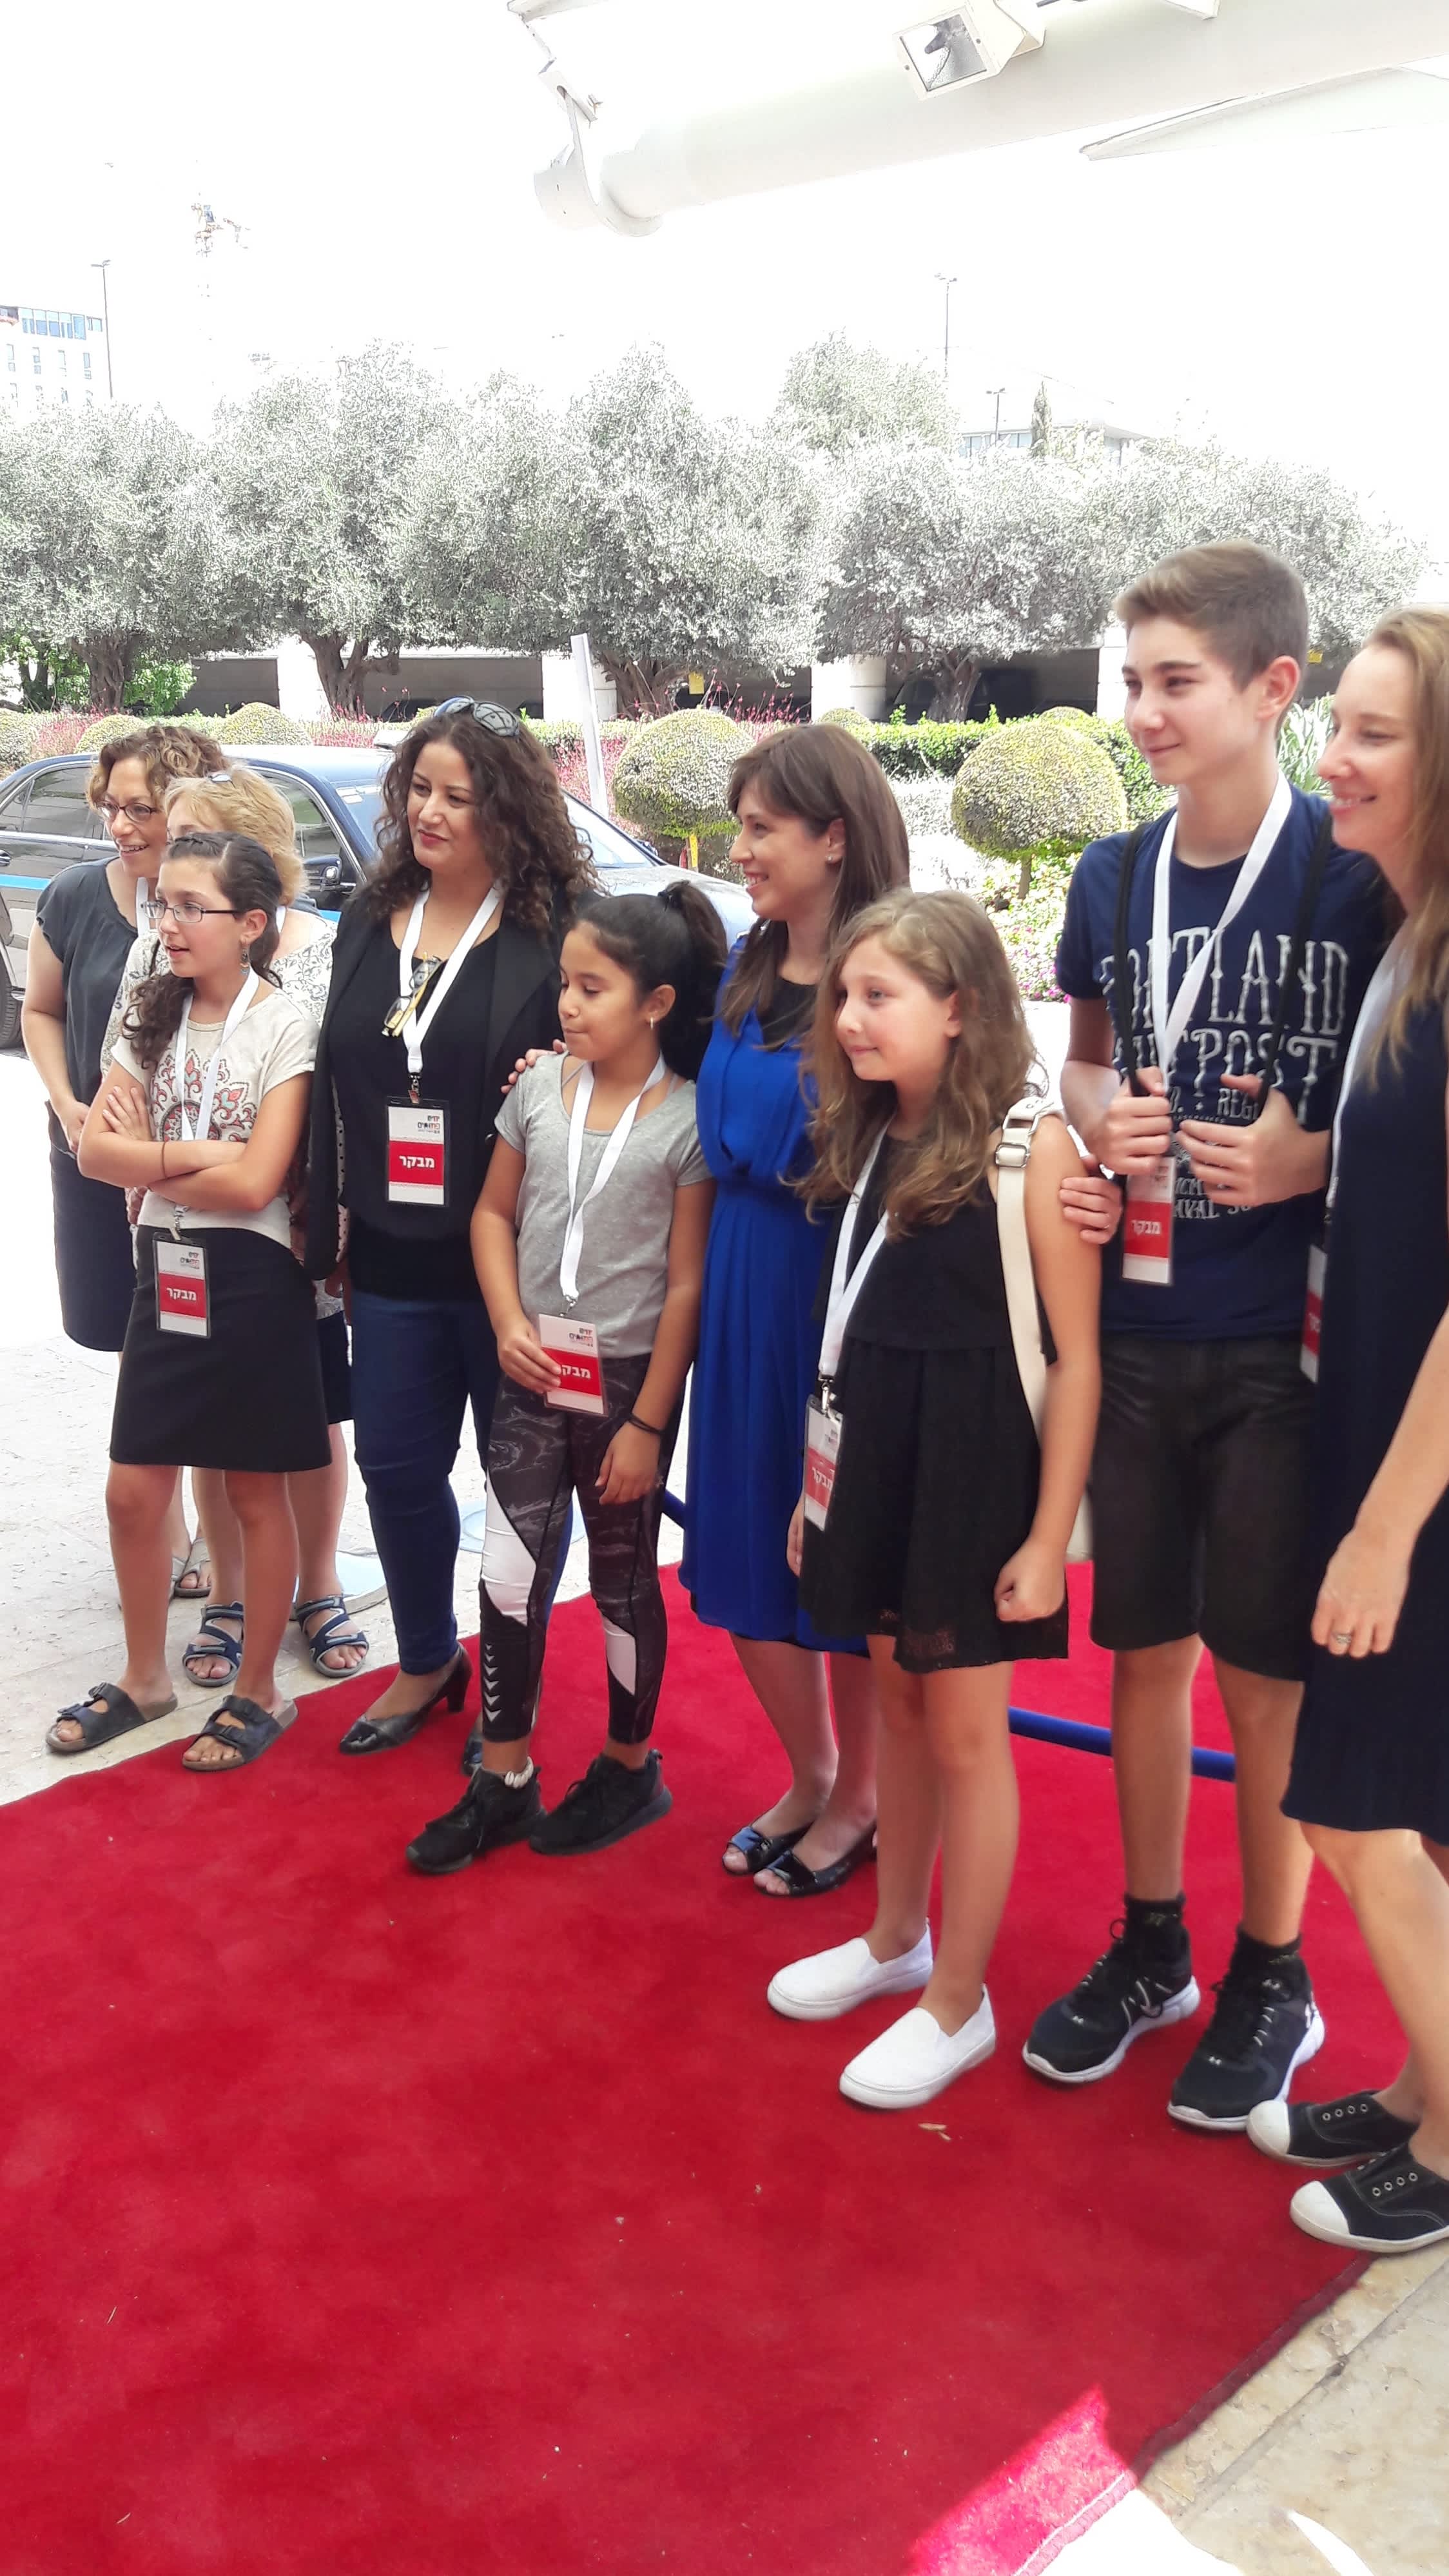 Deputy Foreign Minister Tzipi Hotovely and students at the Foreign Ministry's open day, August 2017 (credit: Herb Keinon) 